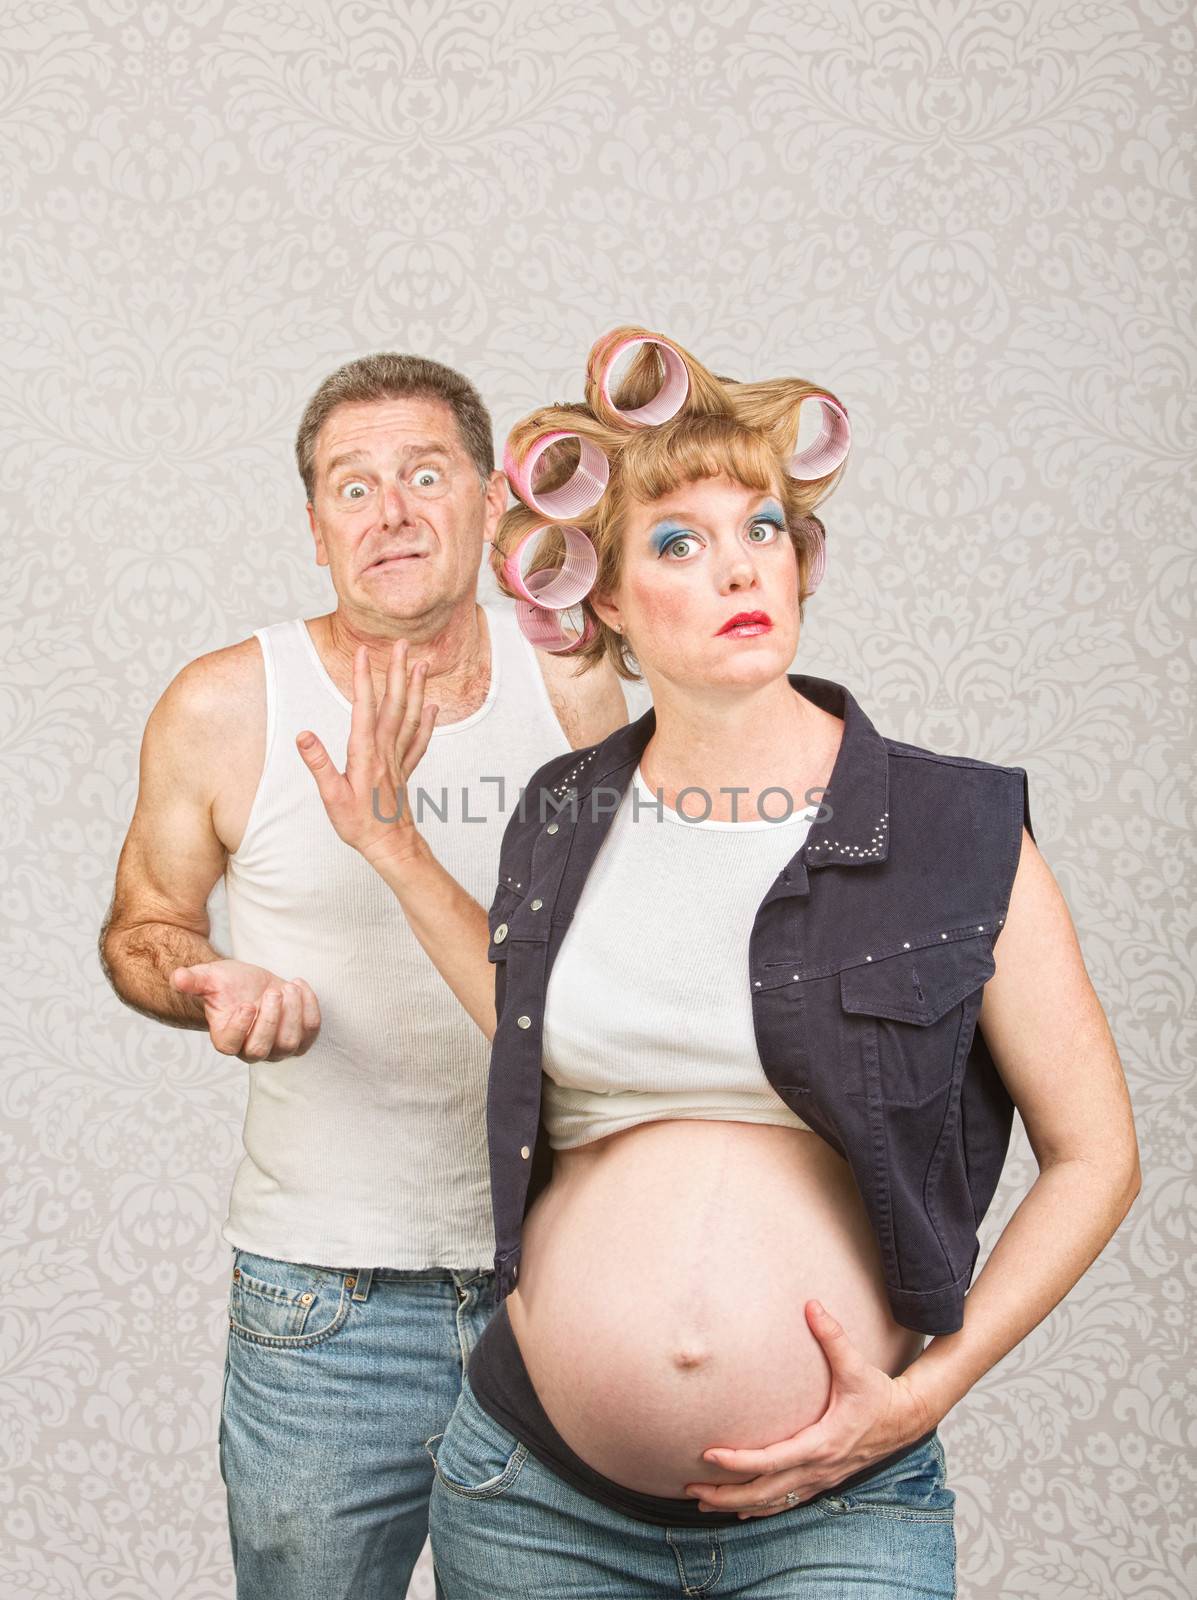 Frustrated Man with Pregnant Woman by Creatista